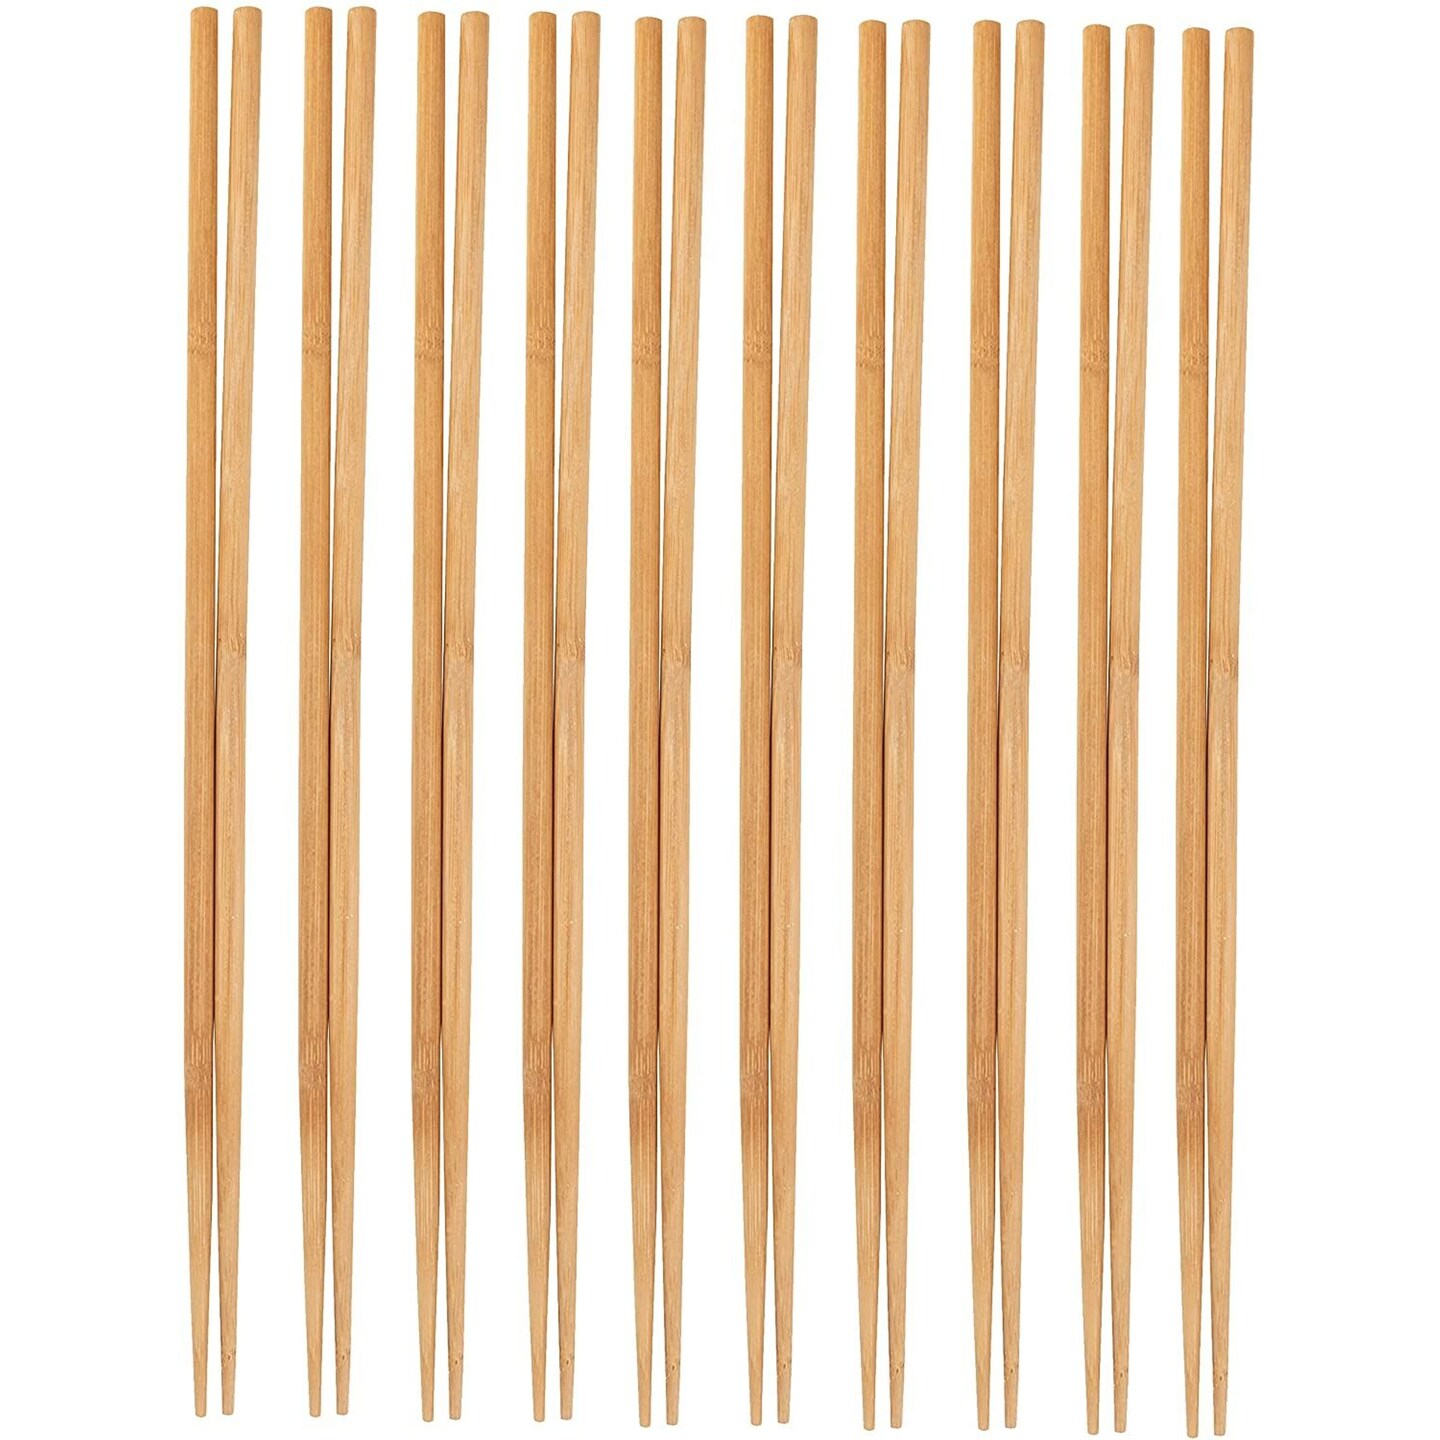 Cooking Chopsticks - 10-Pack Extra Long Cooking Chopsticks, For Cooking, Frying, Hot Pot, Noodles in Chinese and Japanese Style, Natural Bamboo, 16.5 Inches